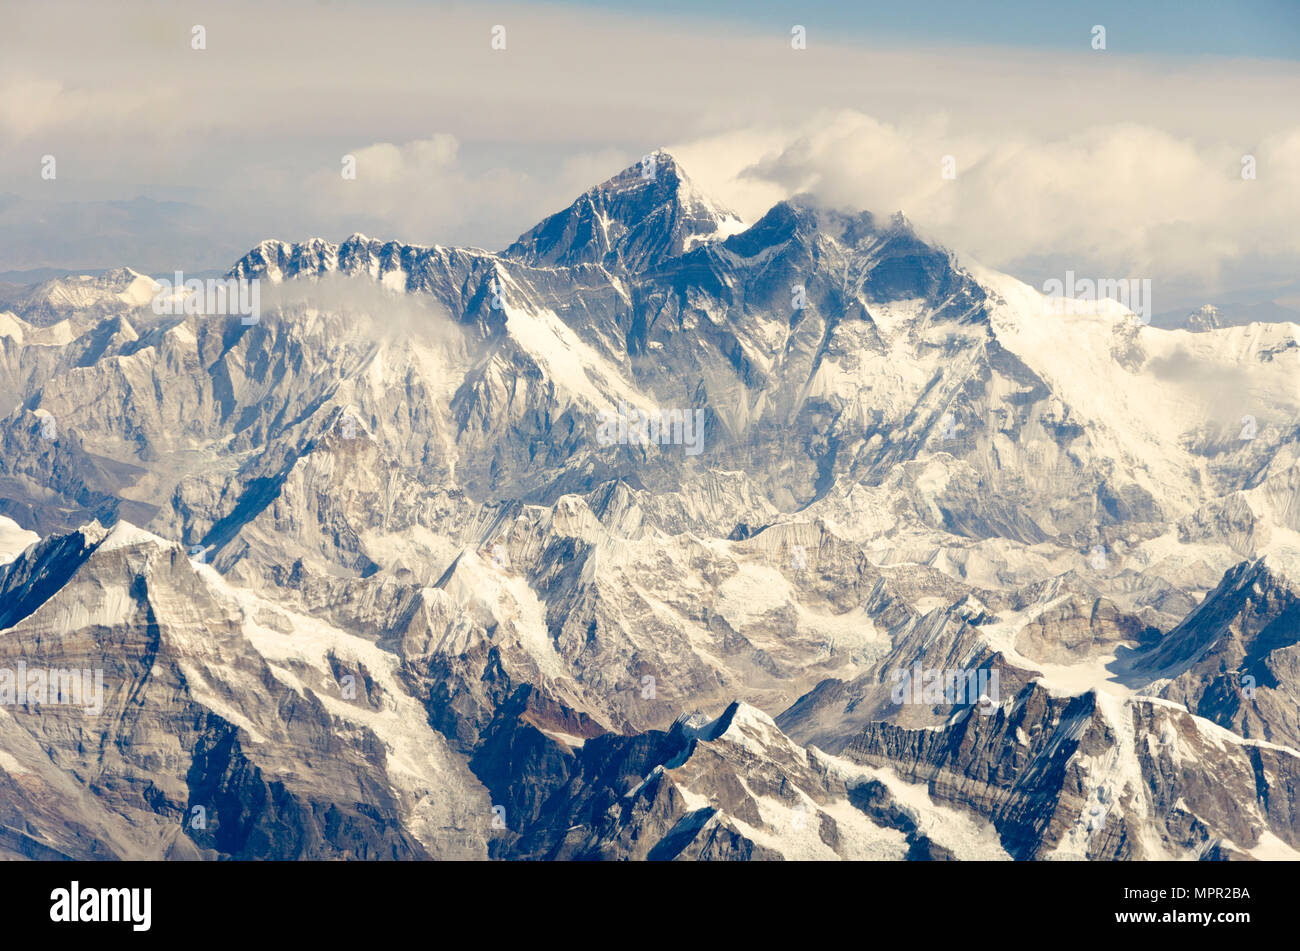 Snow capped mountains, Mount Everest, highest mountain in the world, Himalayas, Nepal Stock Photo